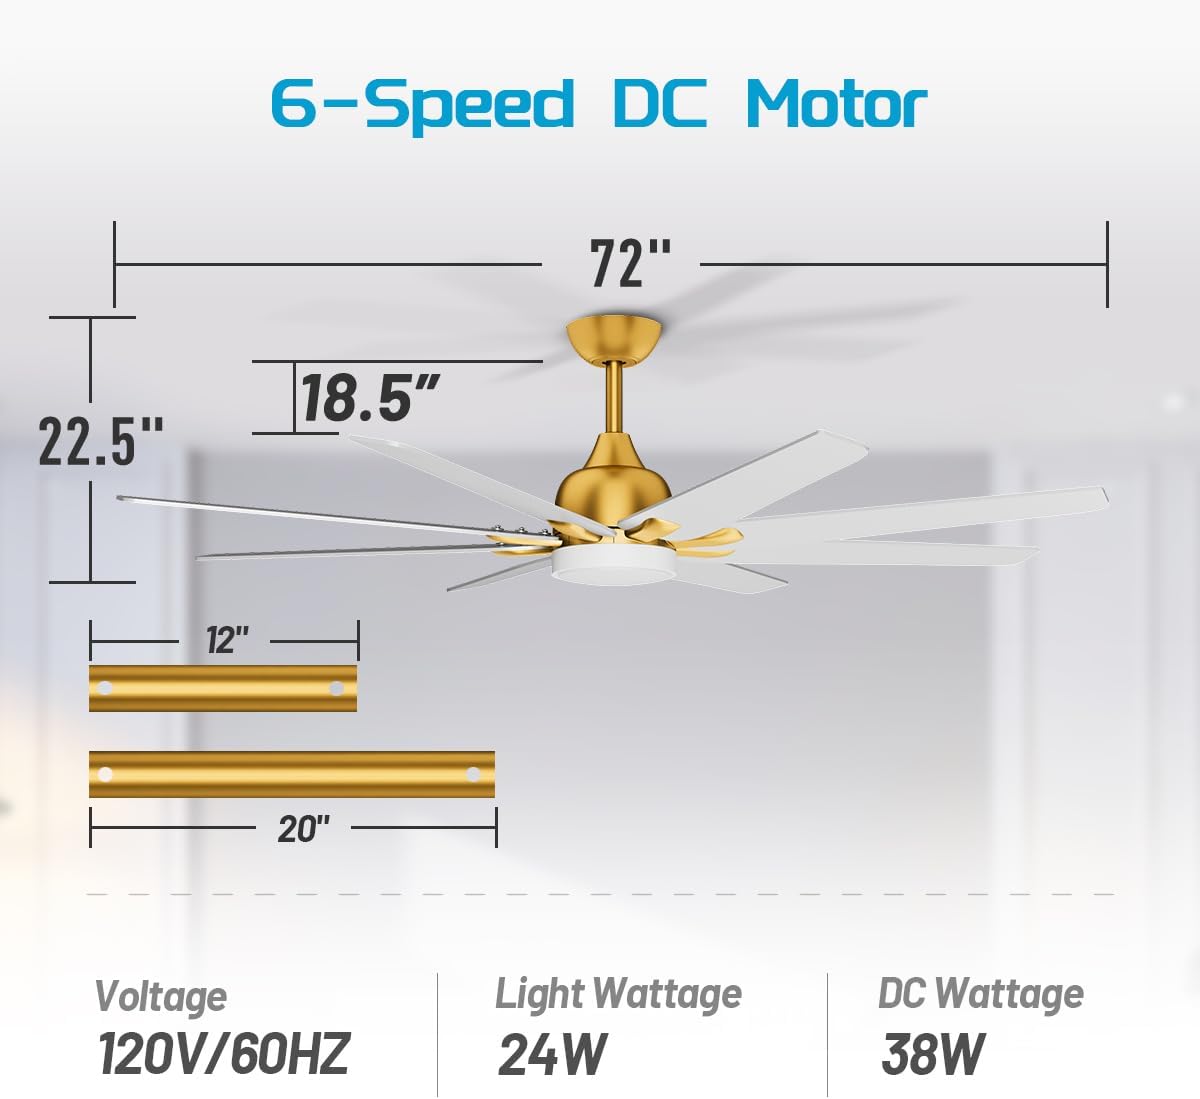 wurzee Large 72" Industrial Large Ceiling Fans with Light and Remote 6 Speed Reversible DC Motor Dimmable Timing LED White and Gold Modern Ceiling Fan for Indoor or Covered Outdoor Kitchen